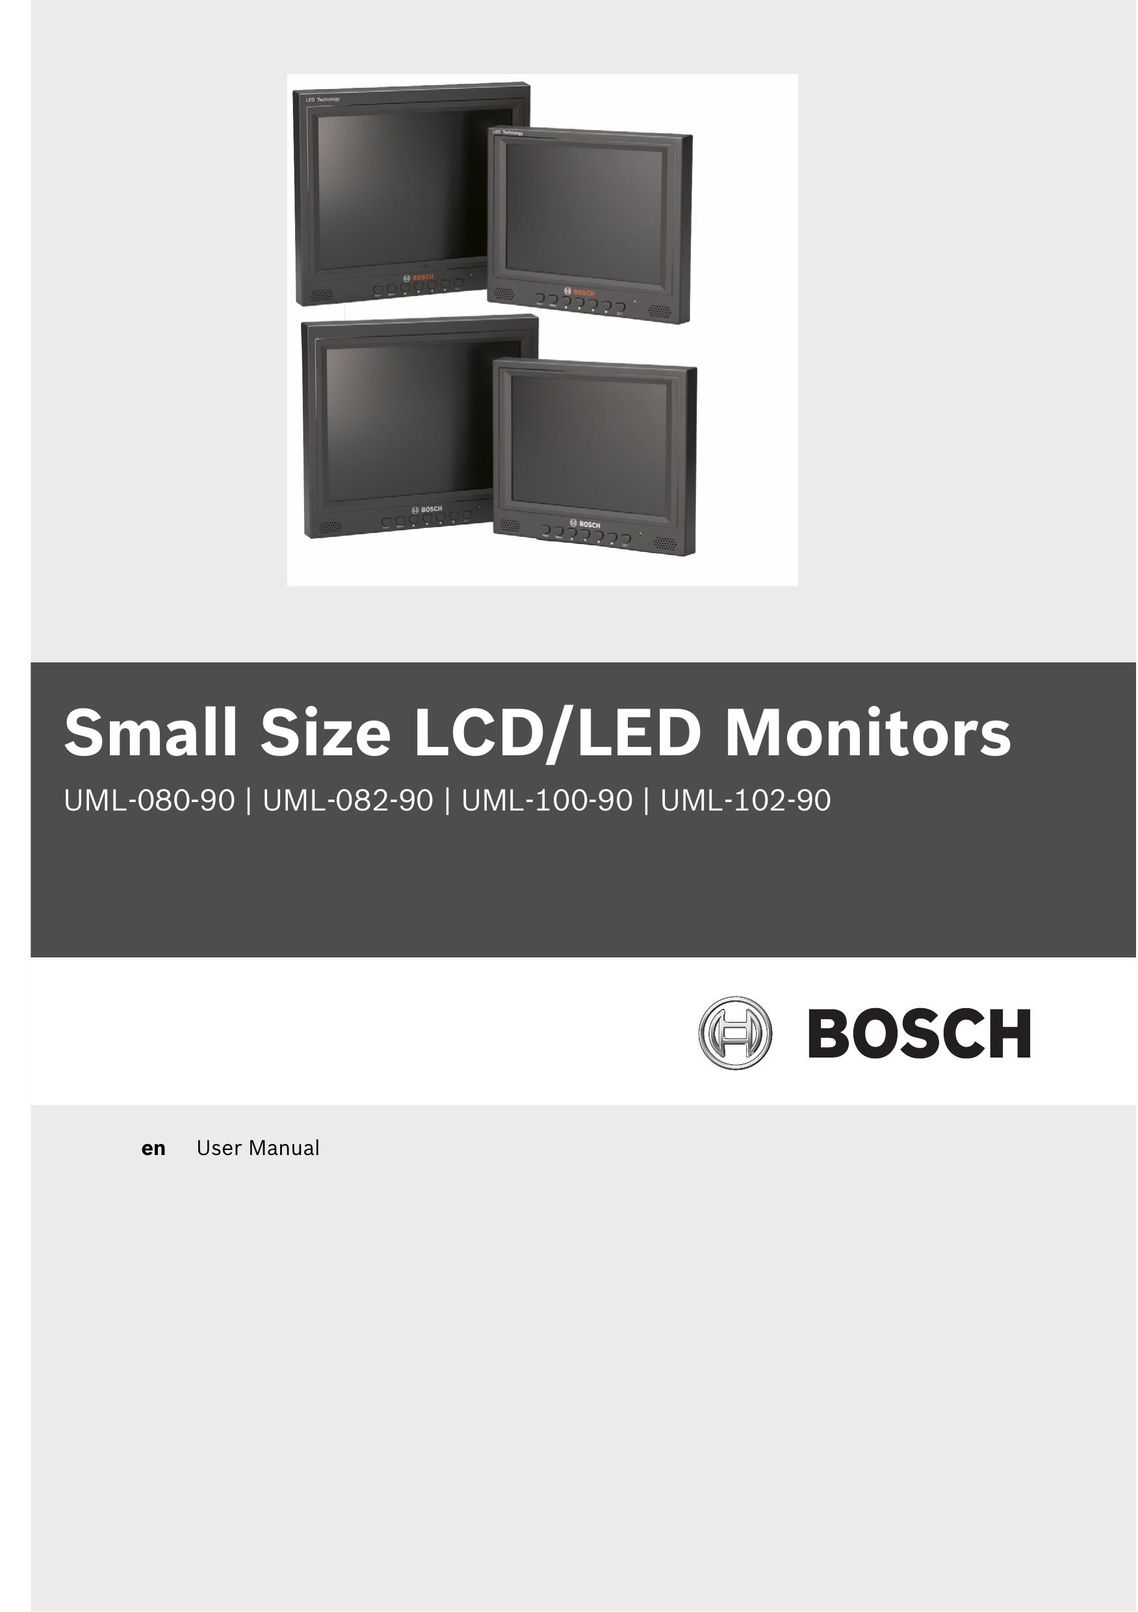 Bosch Appliances UML-082-90 Computer Monitor User Manual (Page 1)